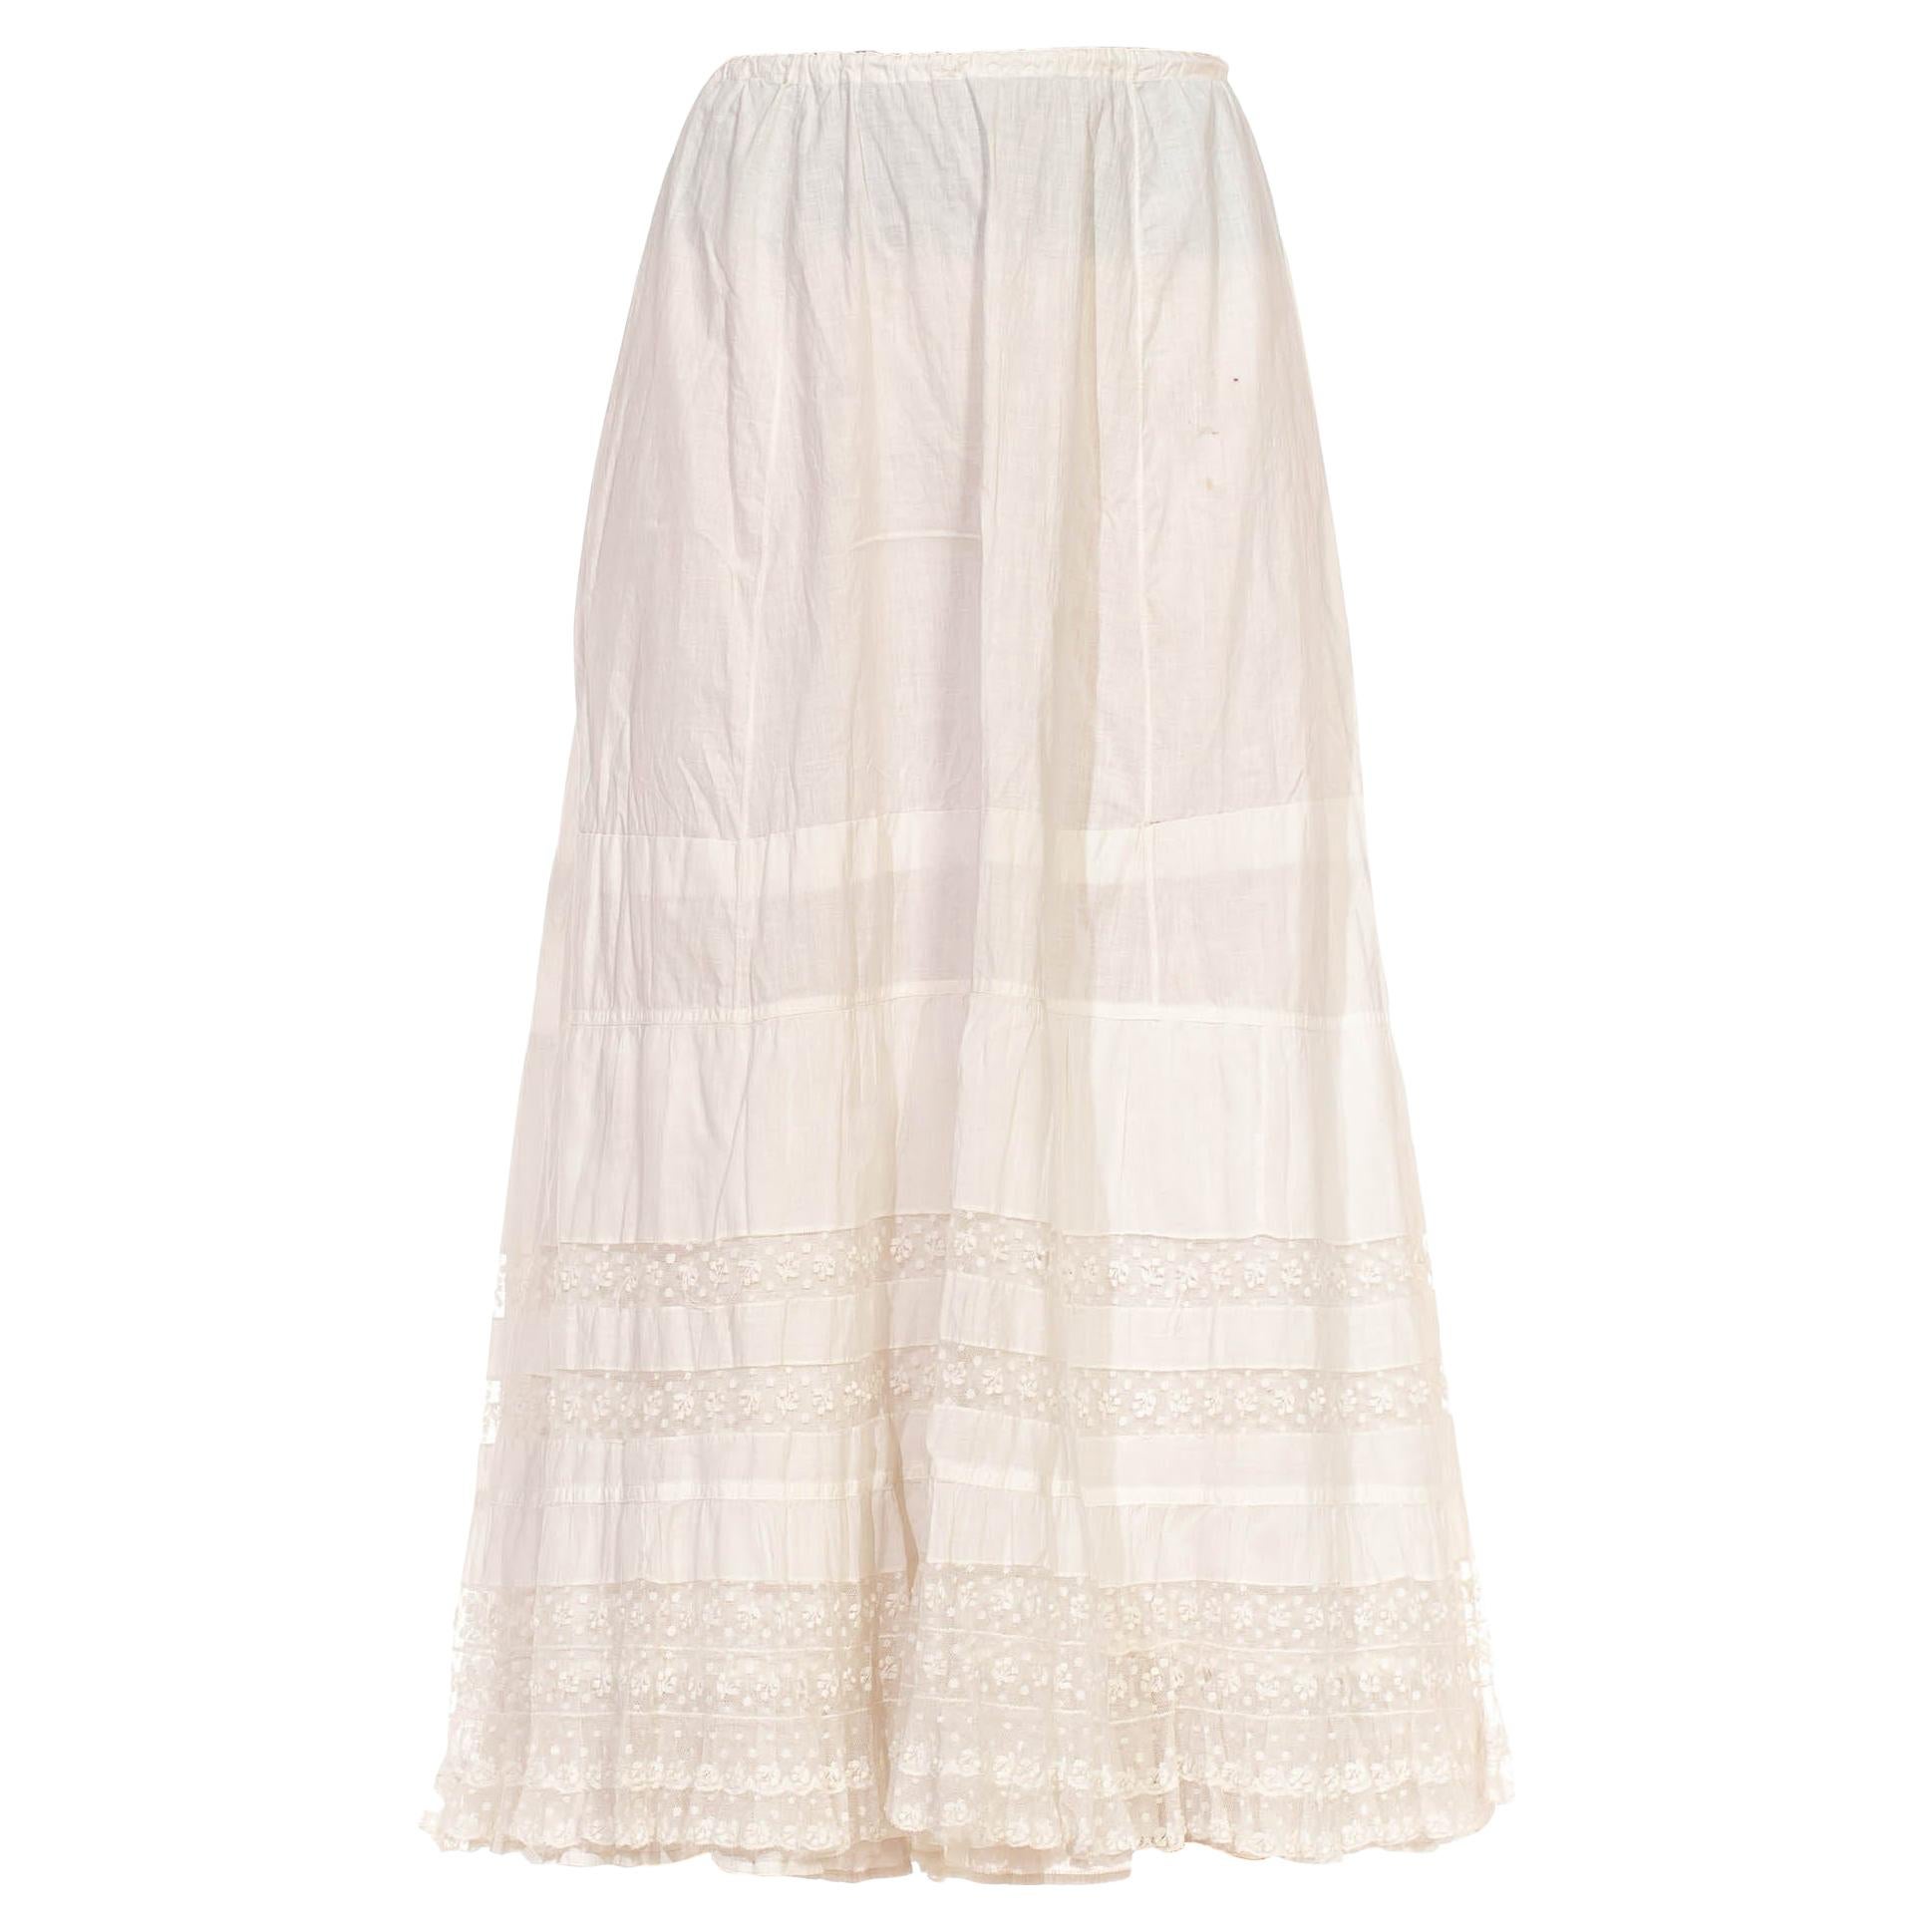 Victorian White Organic Cotton Skirt With Cherry Lace